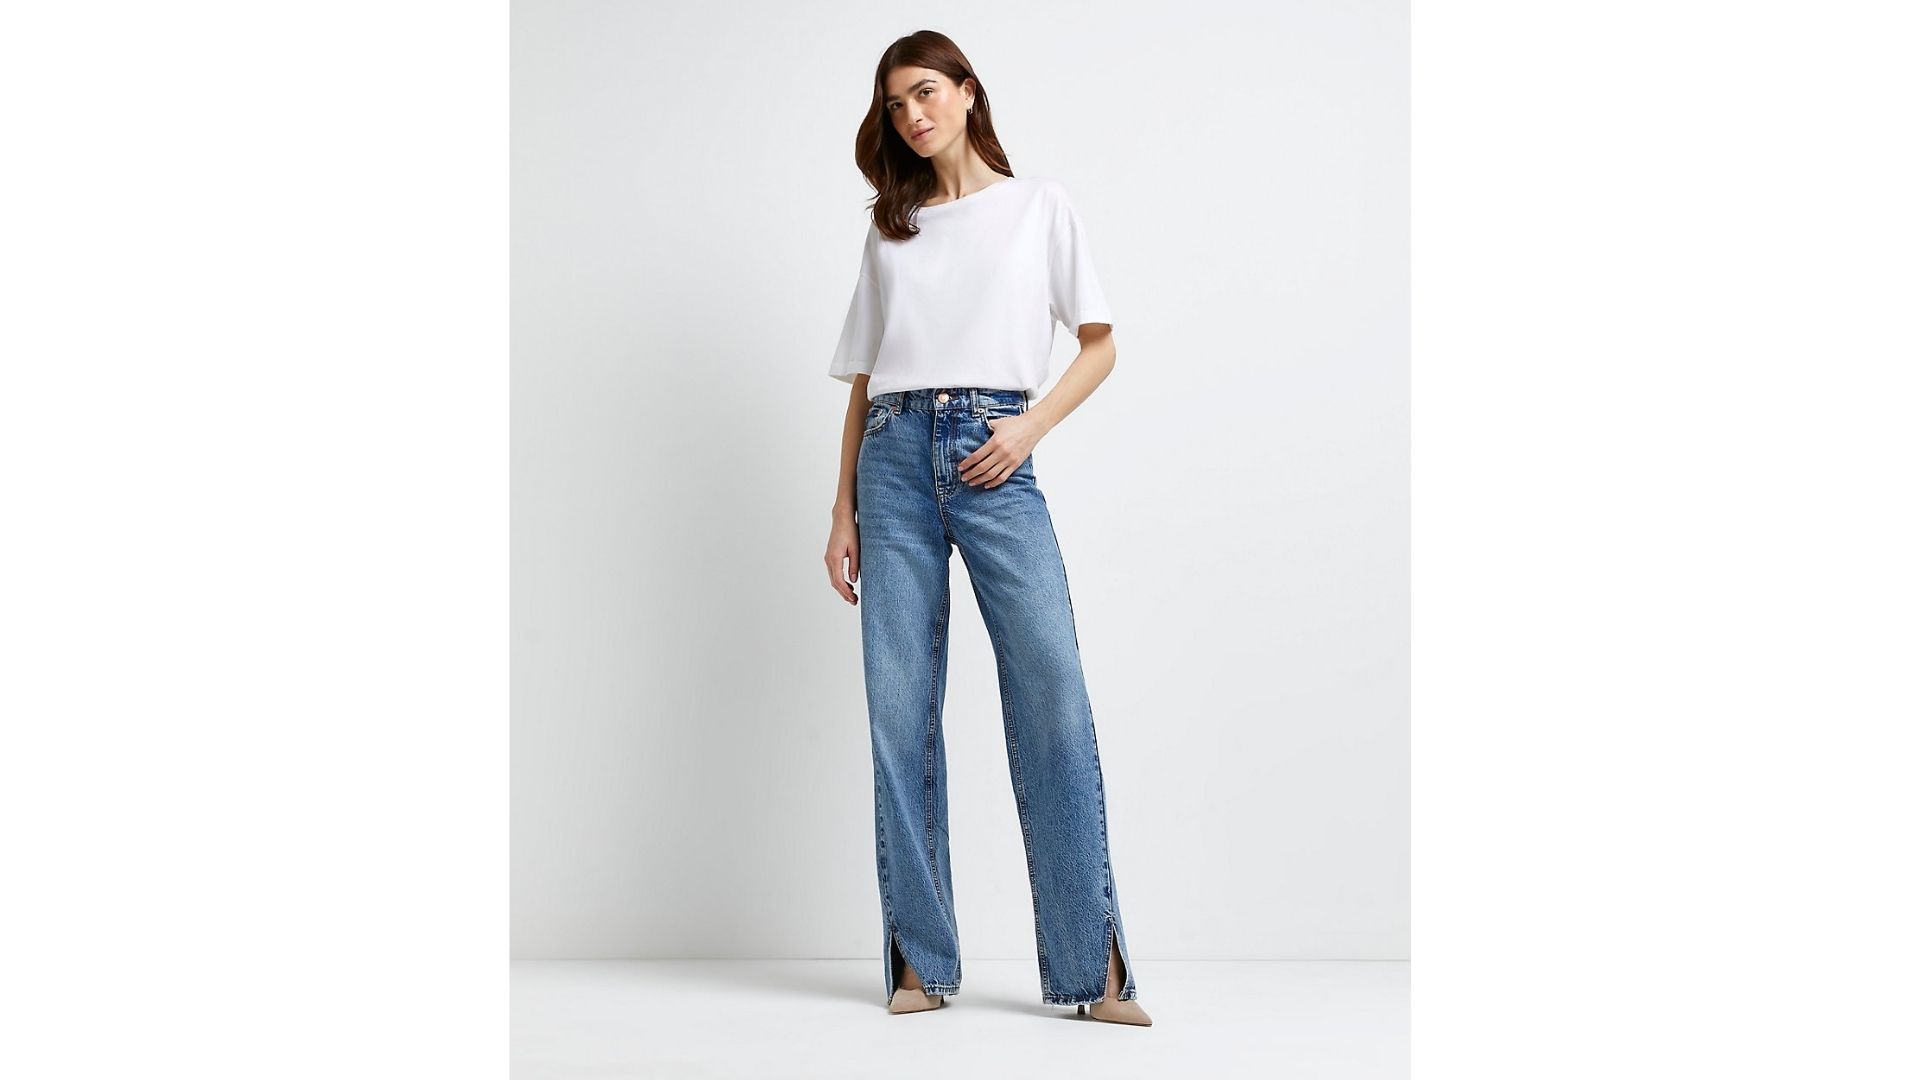 Best Jeans for Women Over 50